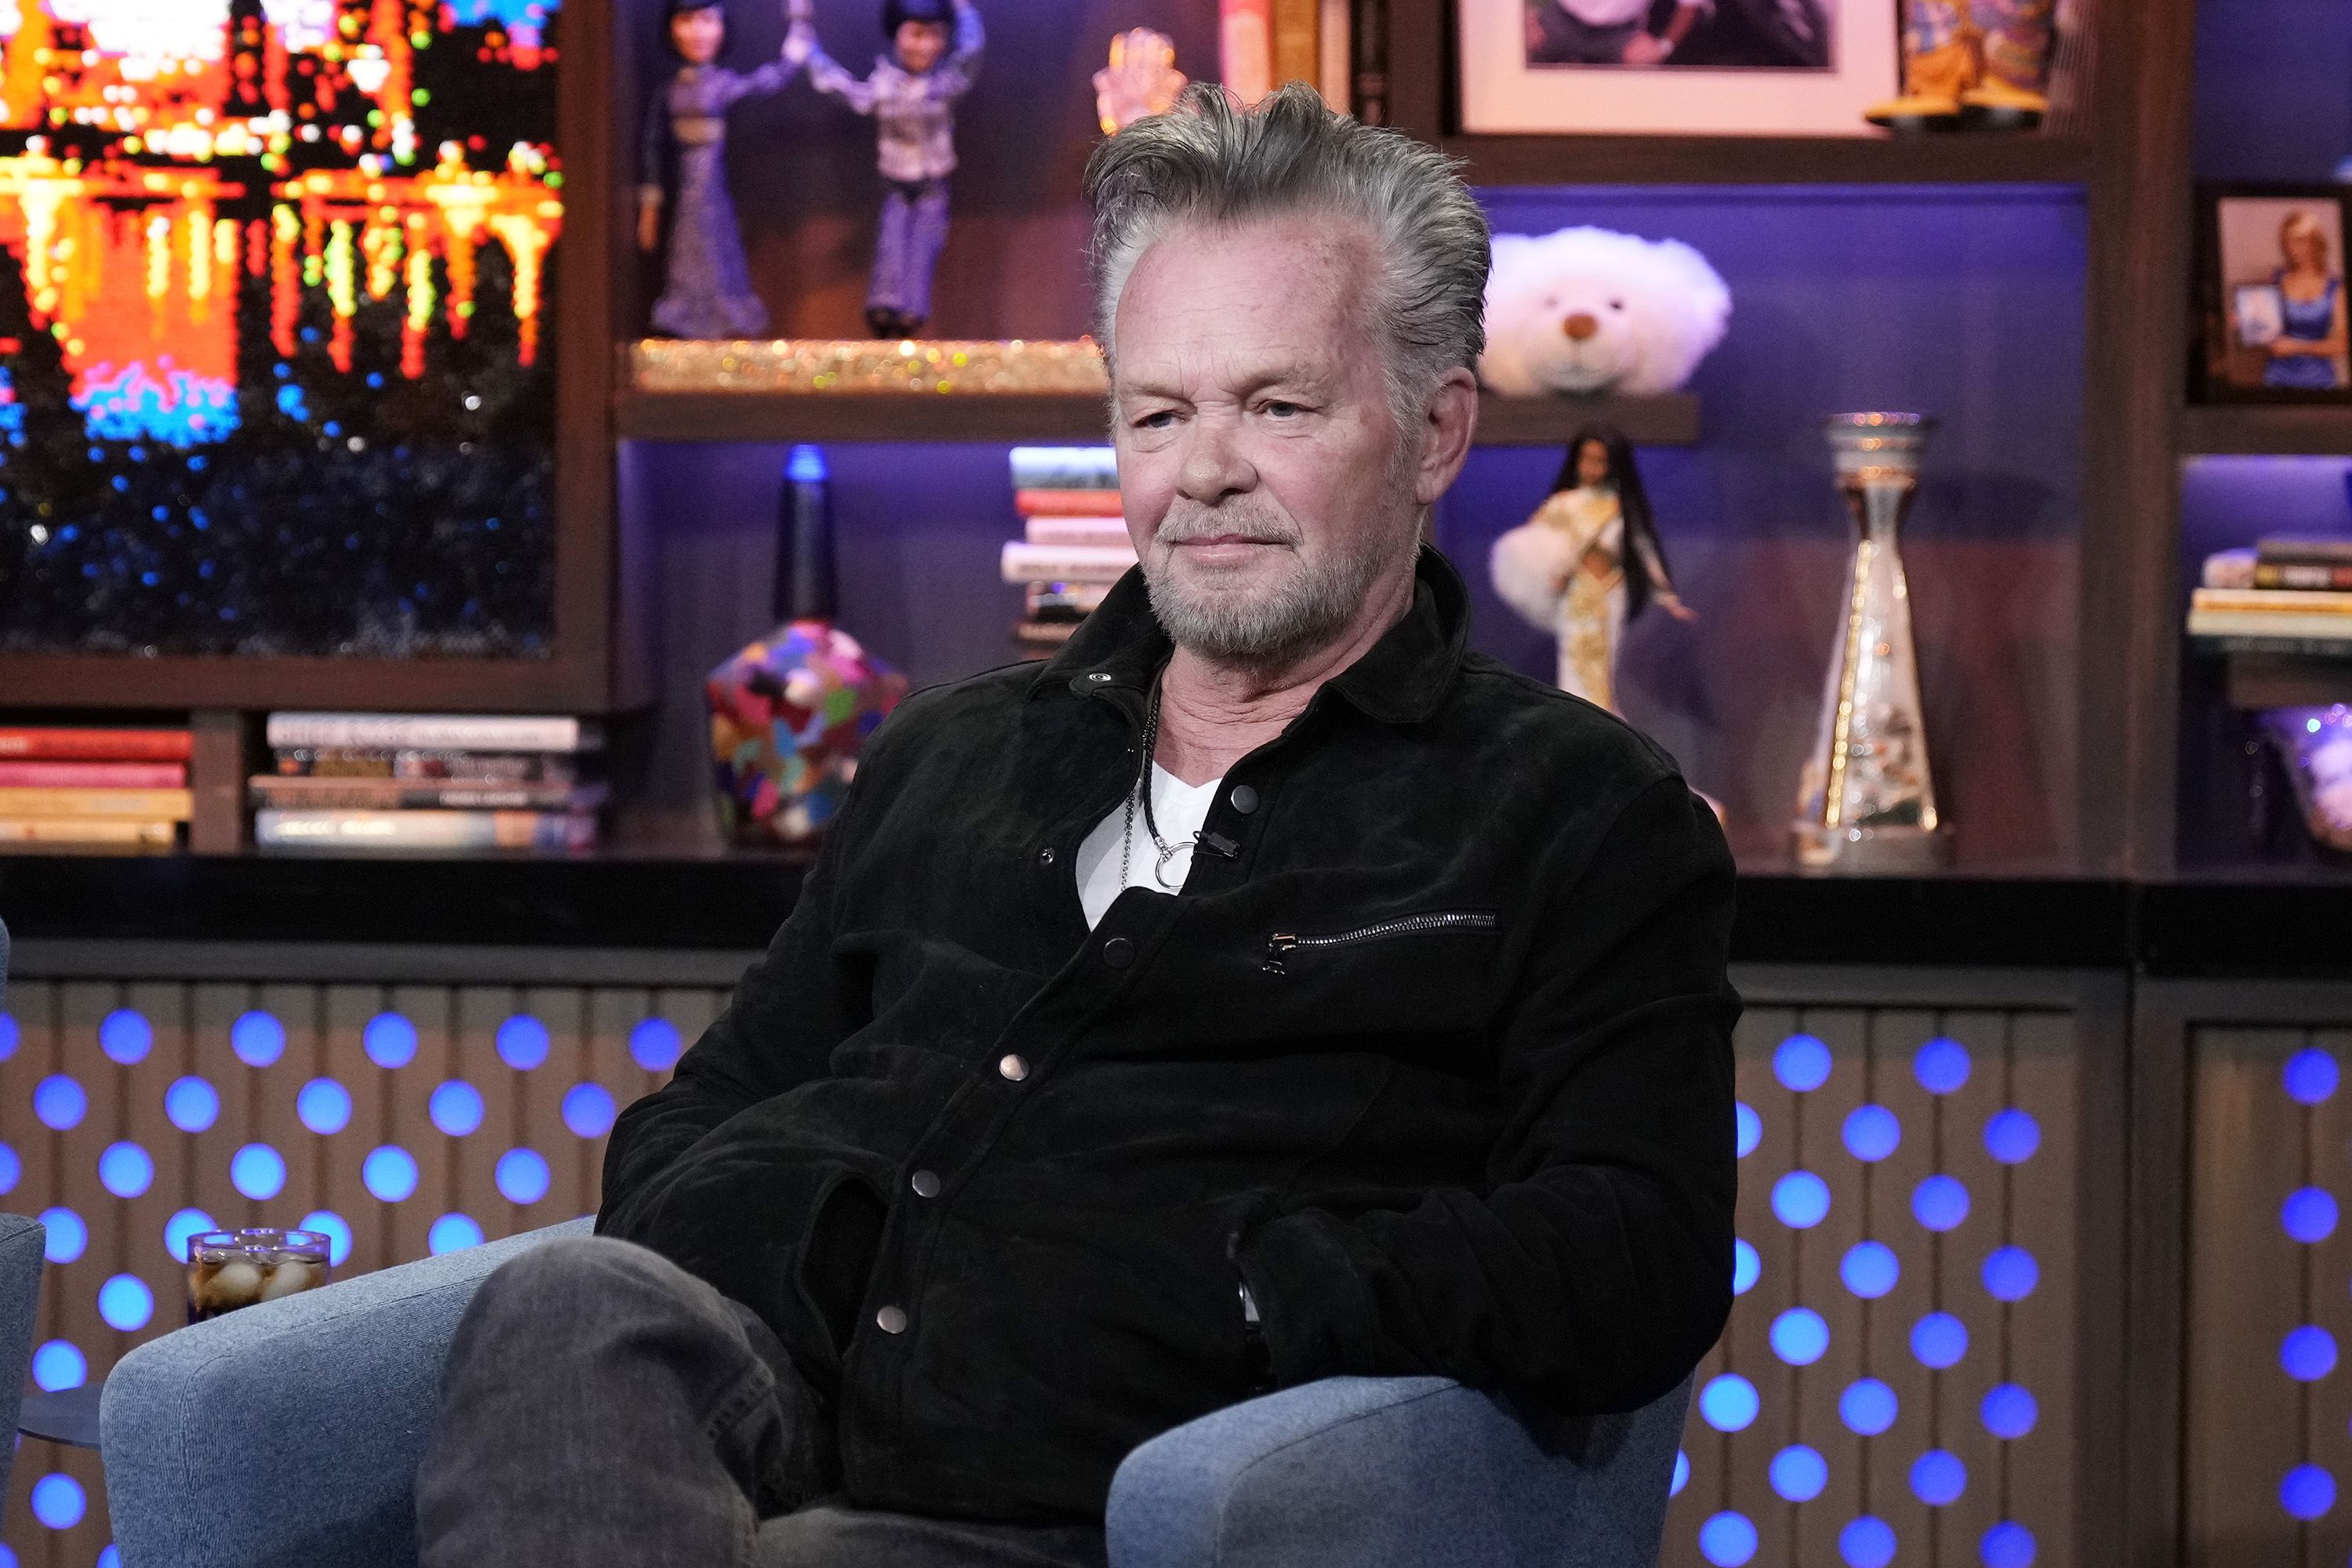 John Mellencamp on season 19 of "Watch What Happens Live With Andy Cohen" on November 16, 2022 | Source: Getty Images